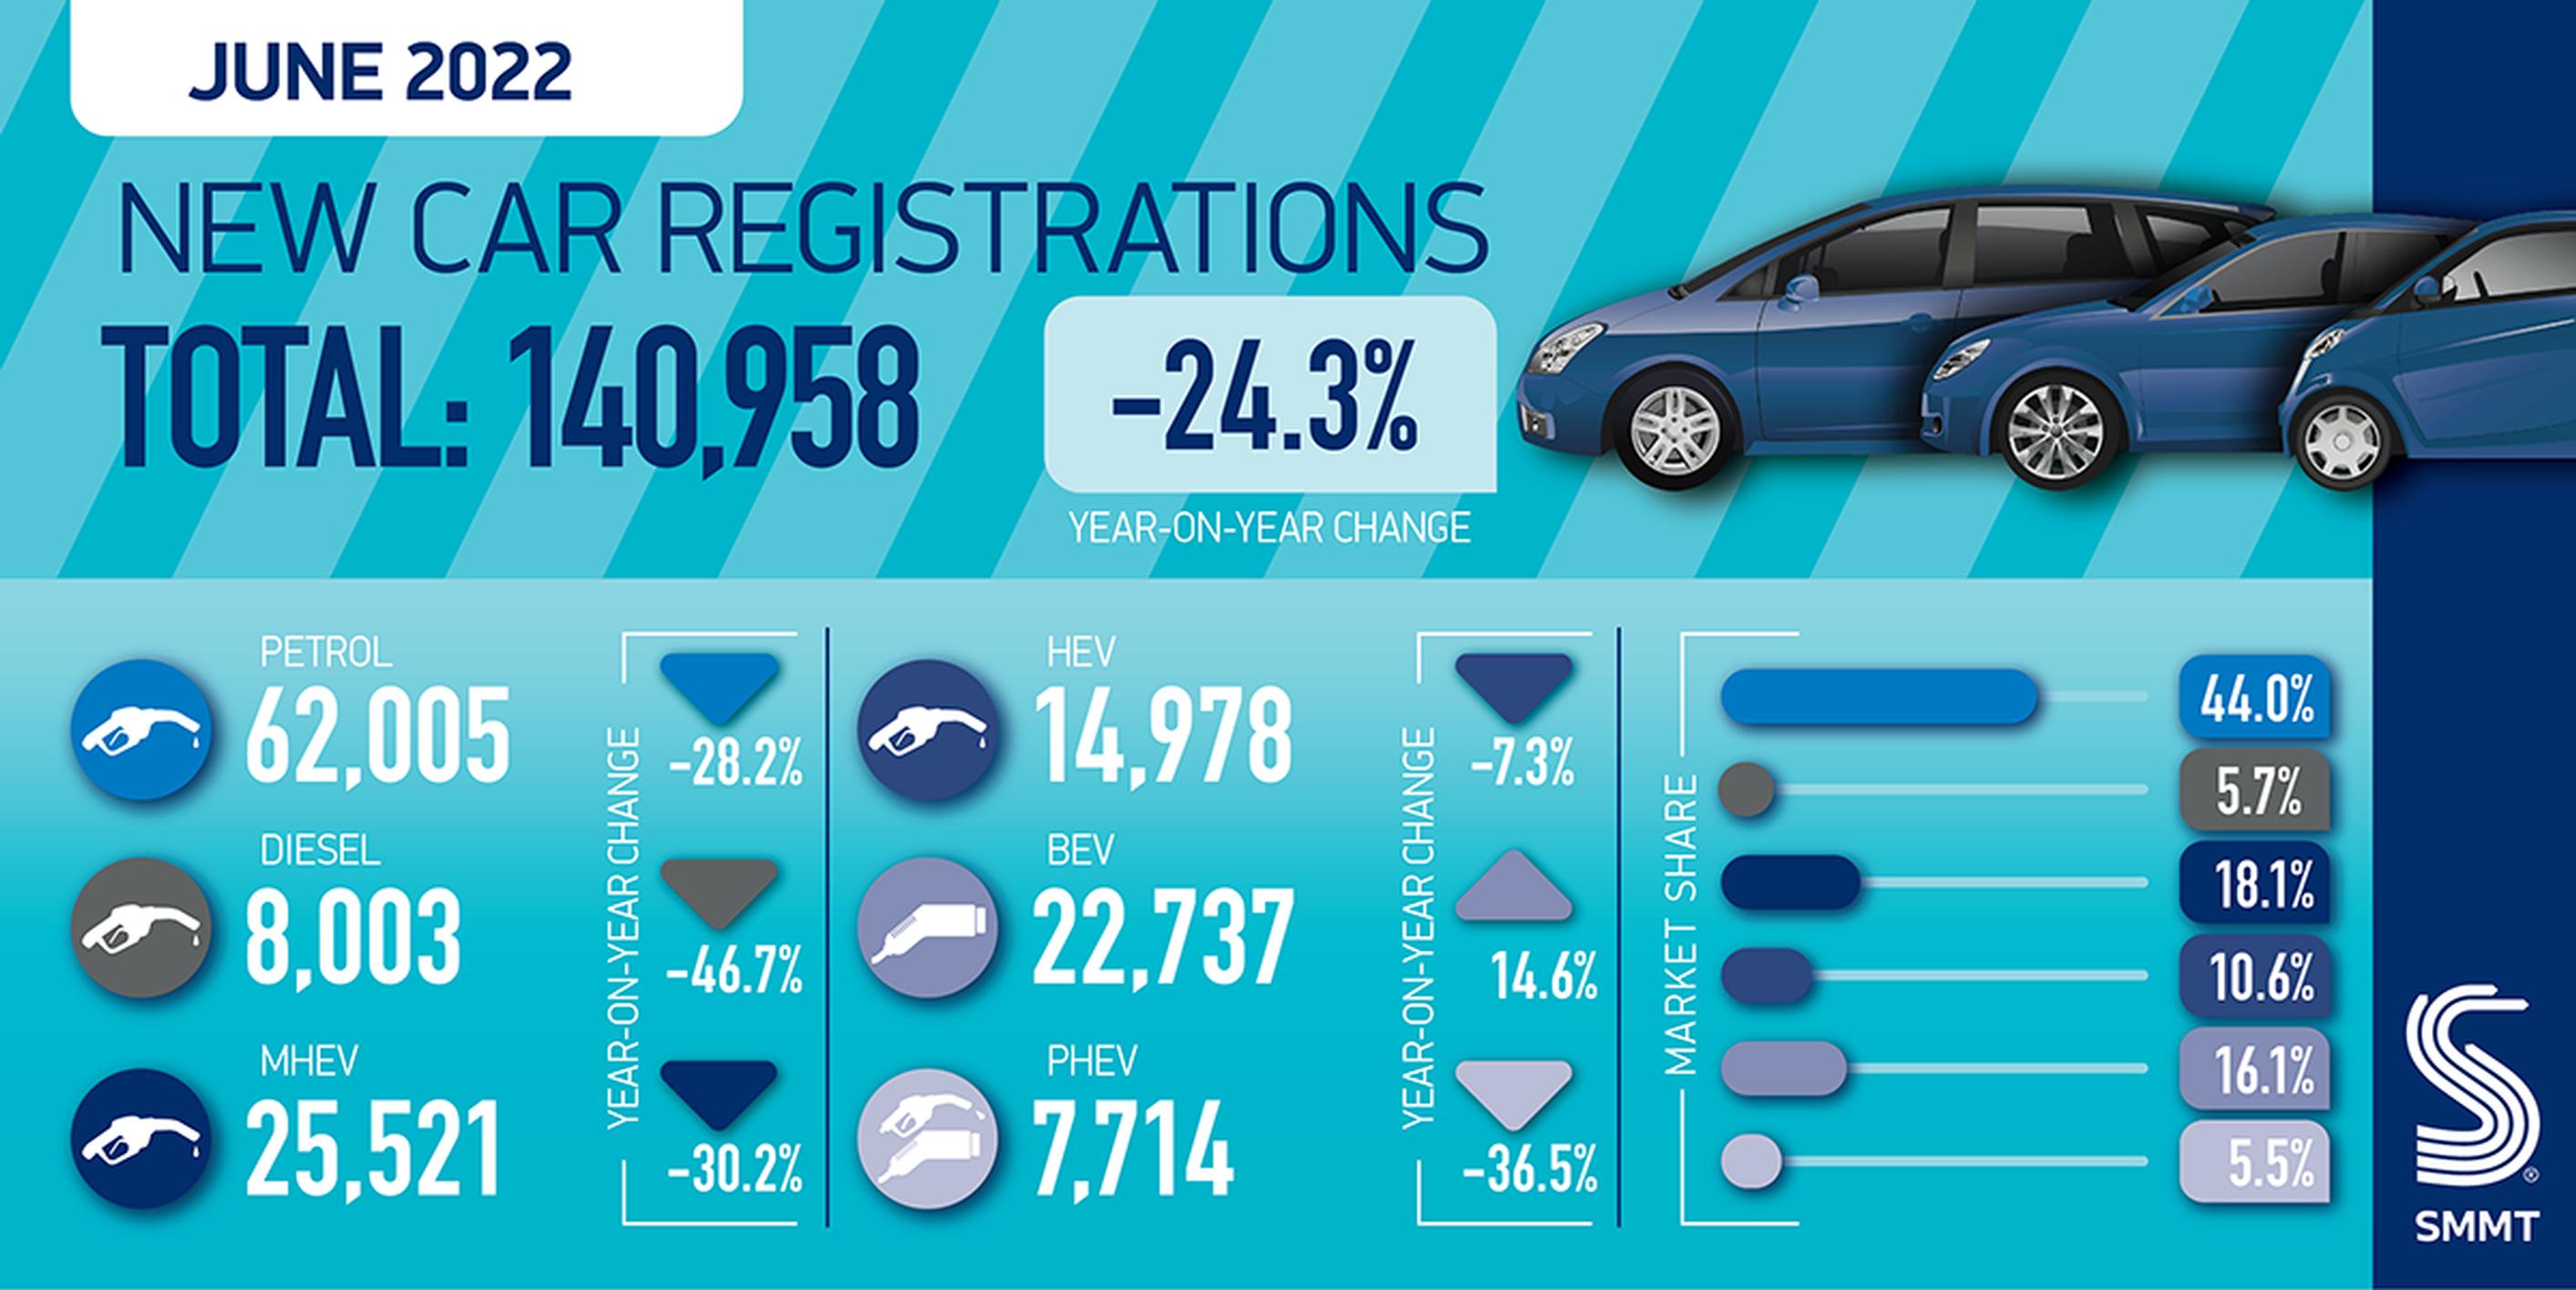 Supply shortages hold back new car market, but EV sales continue to grow